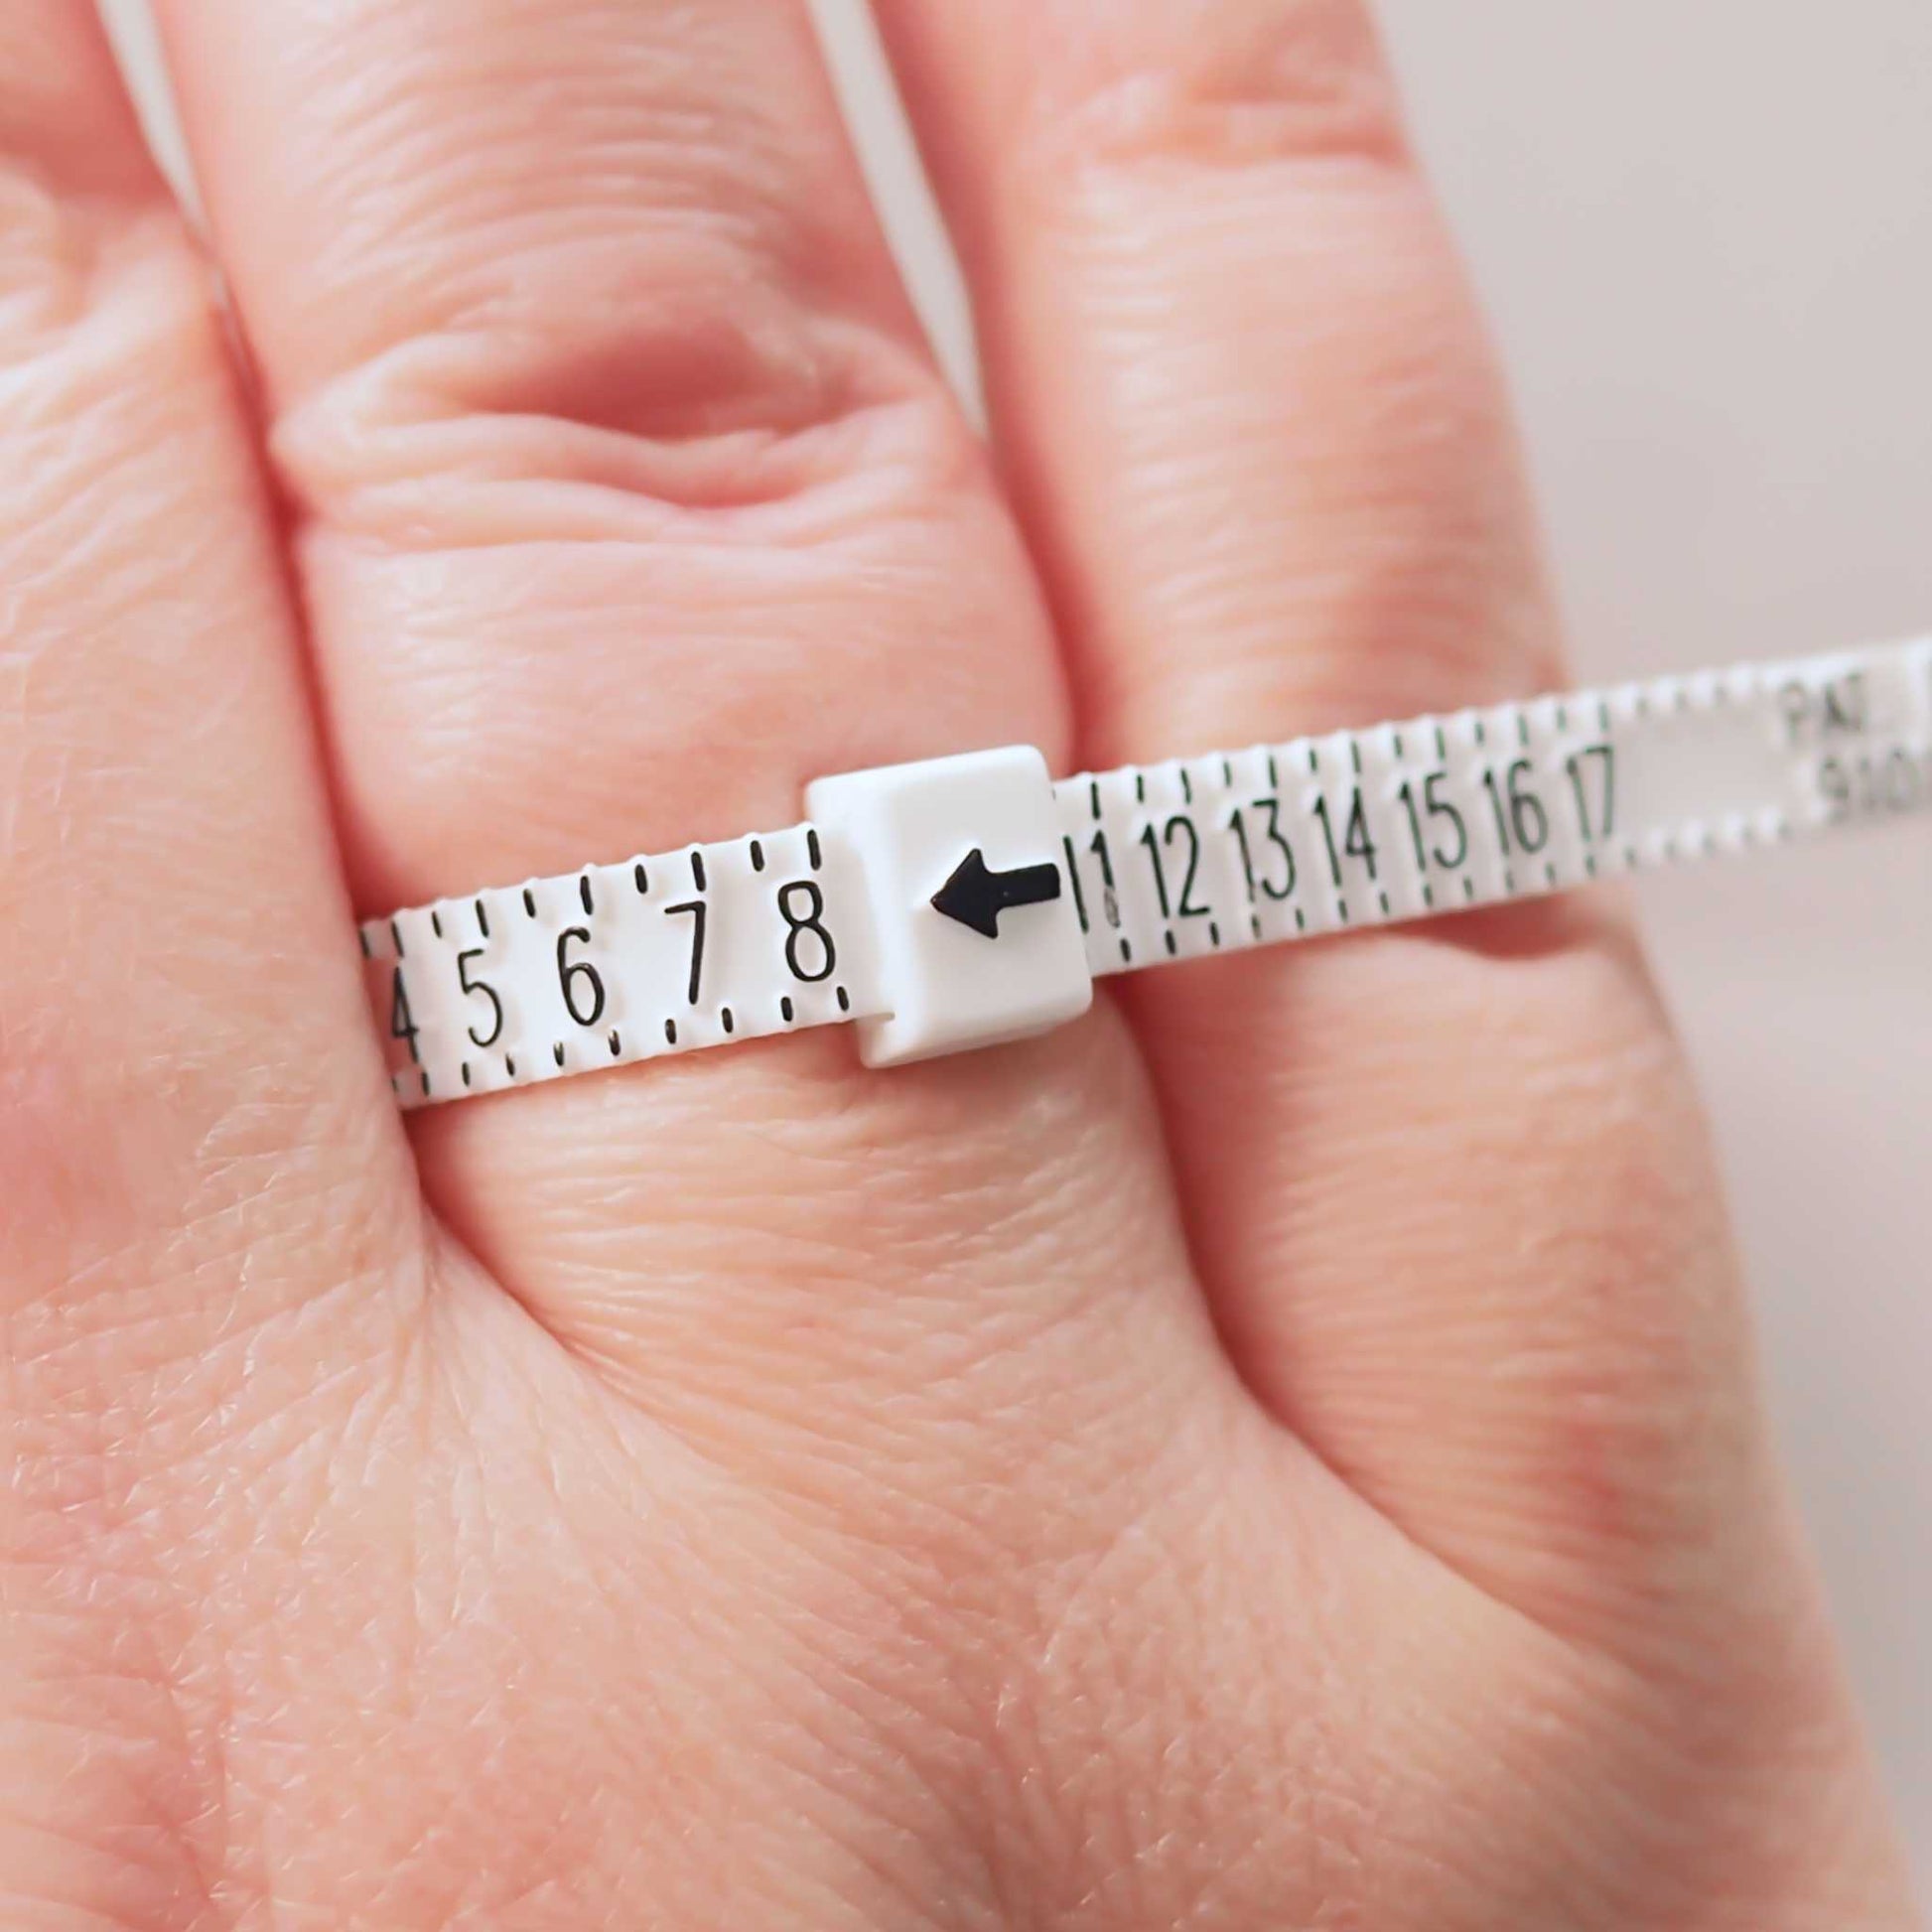 Ring Size measure gauge for measuring fingers using the US sizing system in numbers from 1 to 17